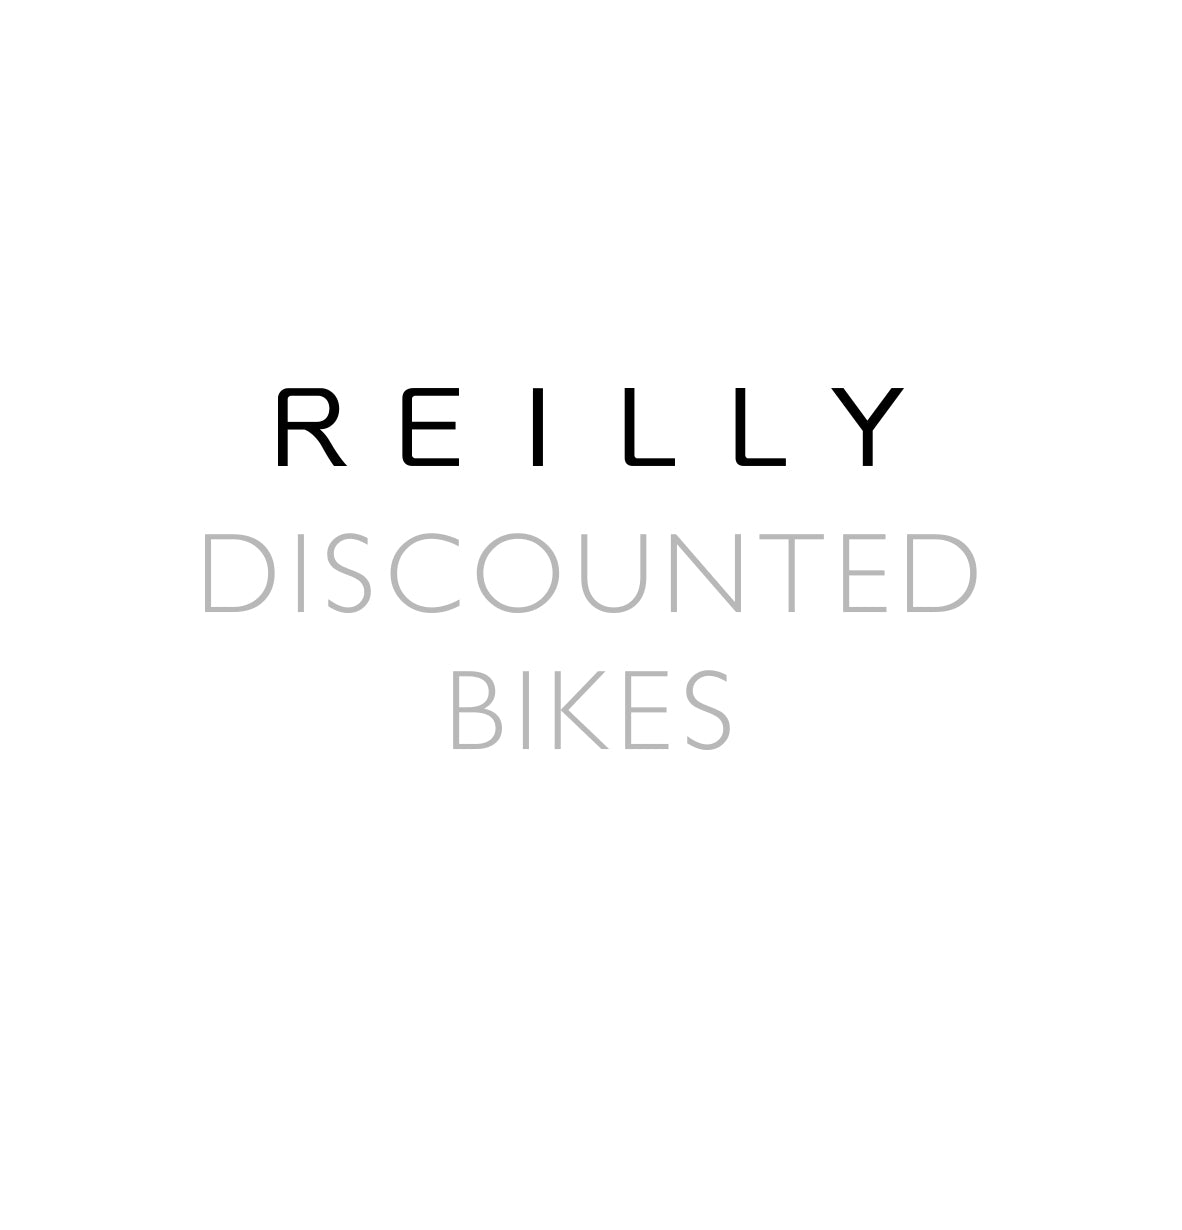 On a white background the wording Reilly Discounted Bikes.